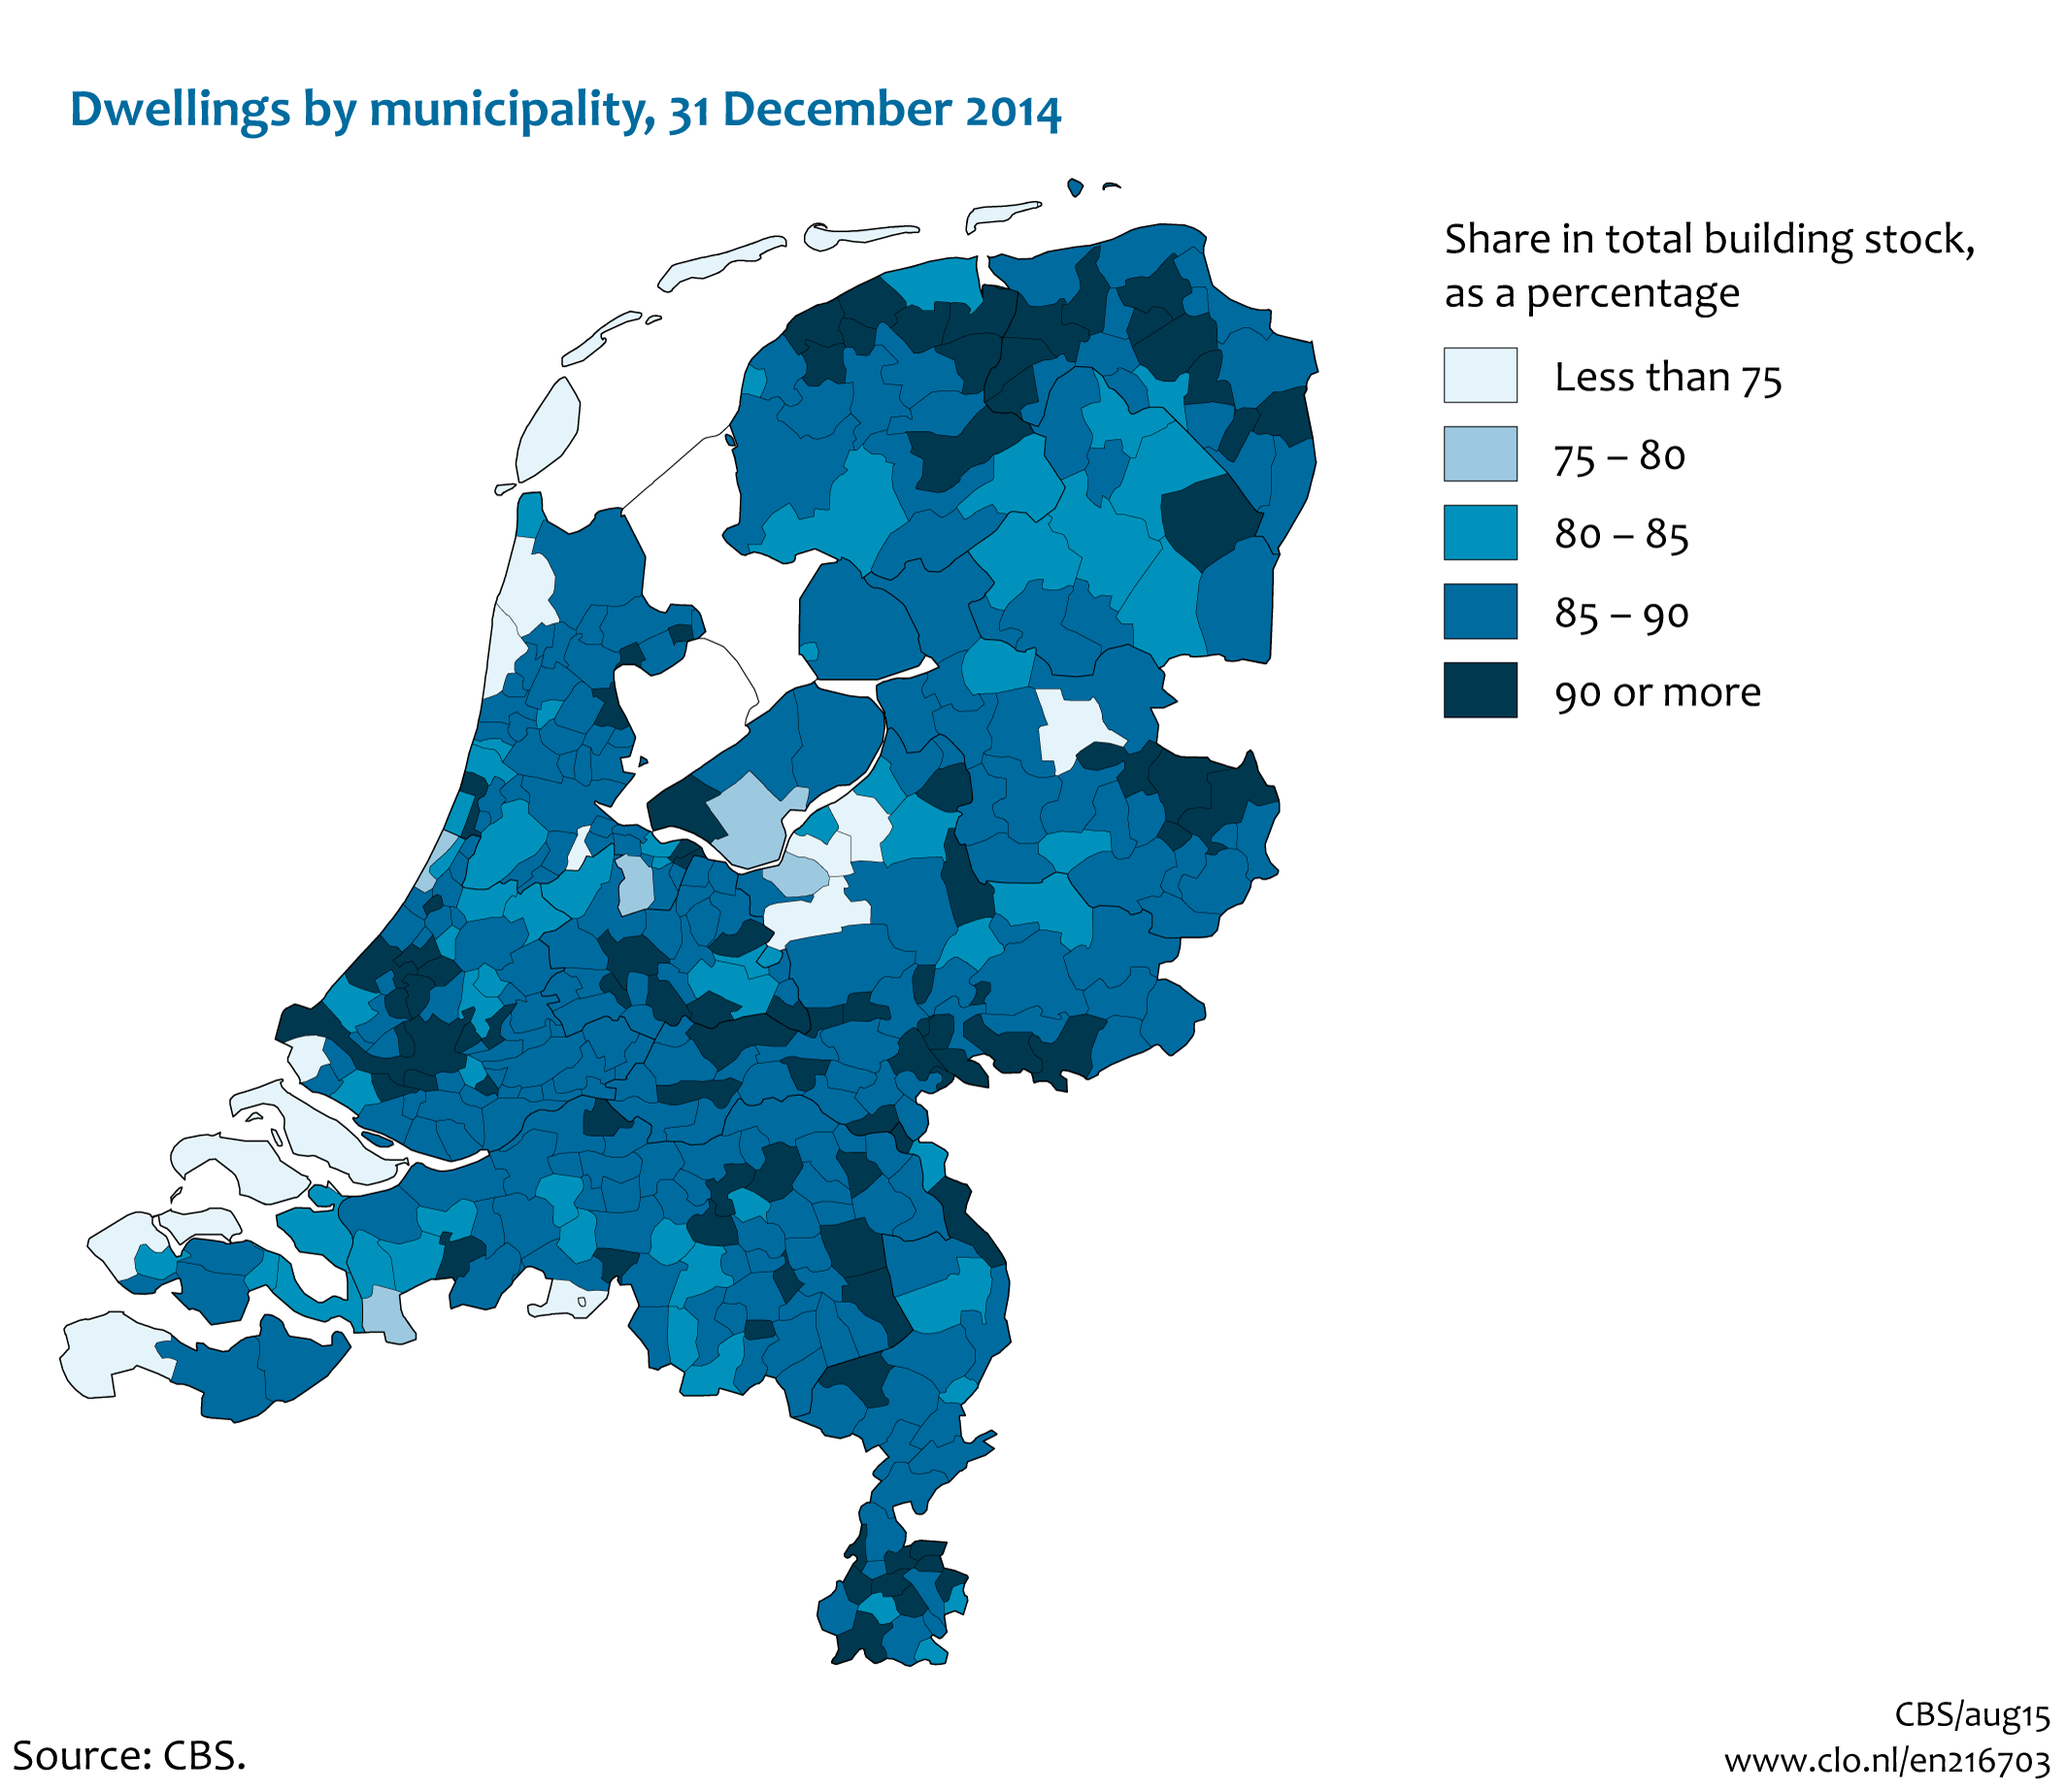 Image  Dwellings by municipality, 31 December 2013. The image is further explained in the text.